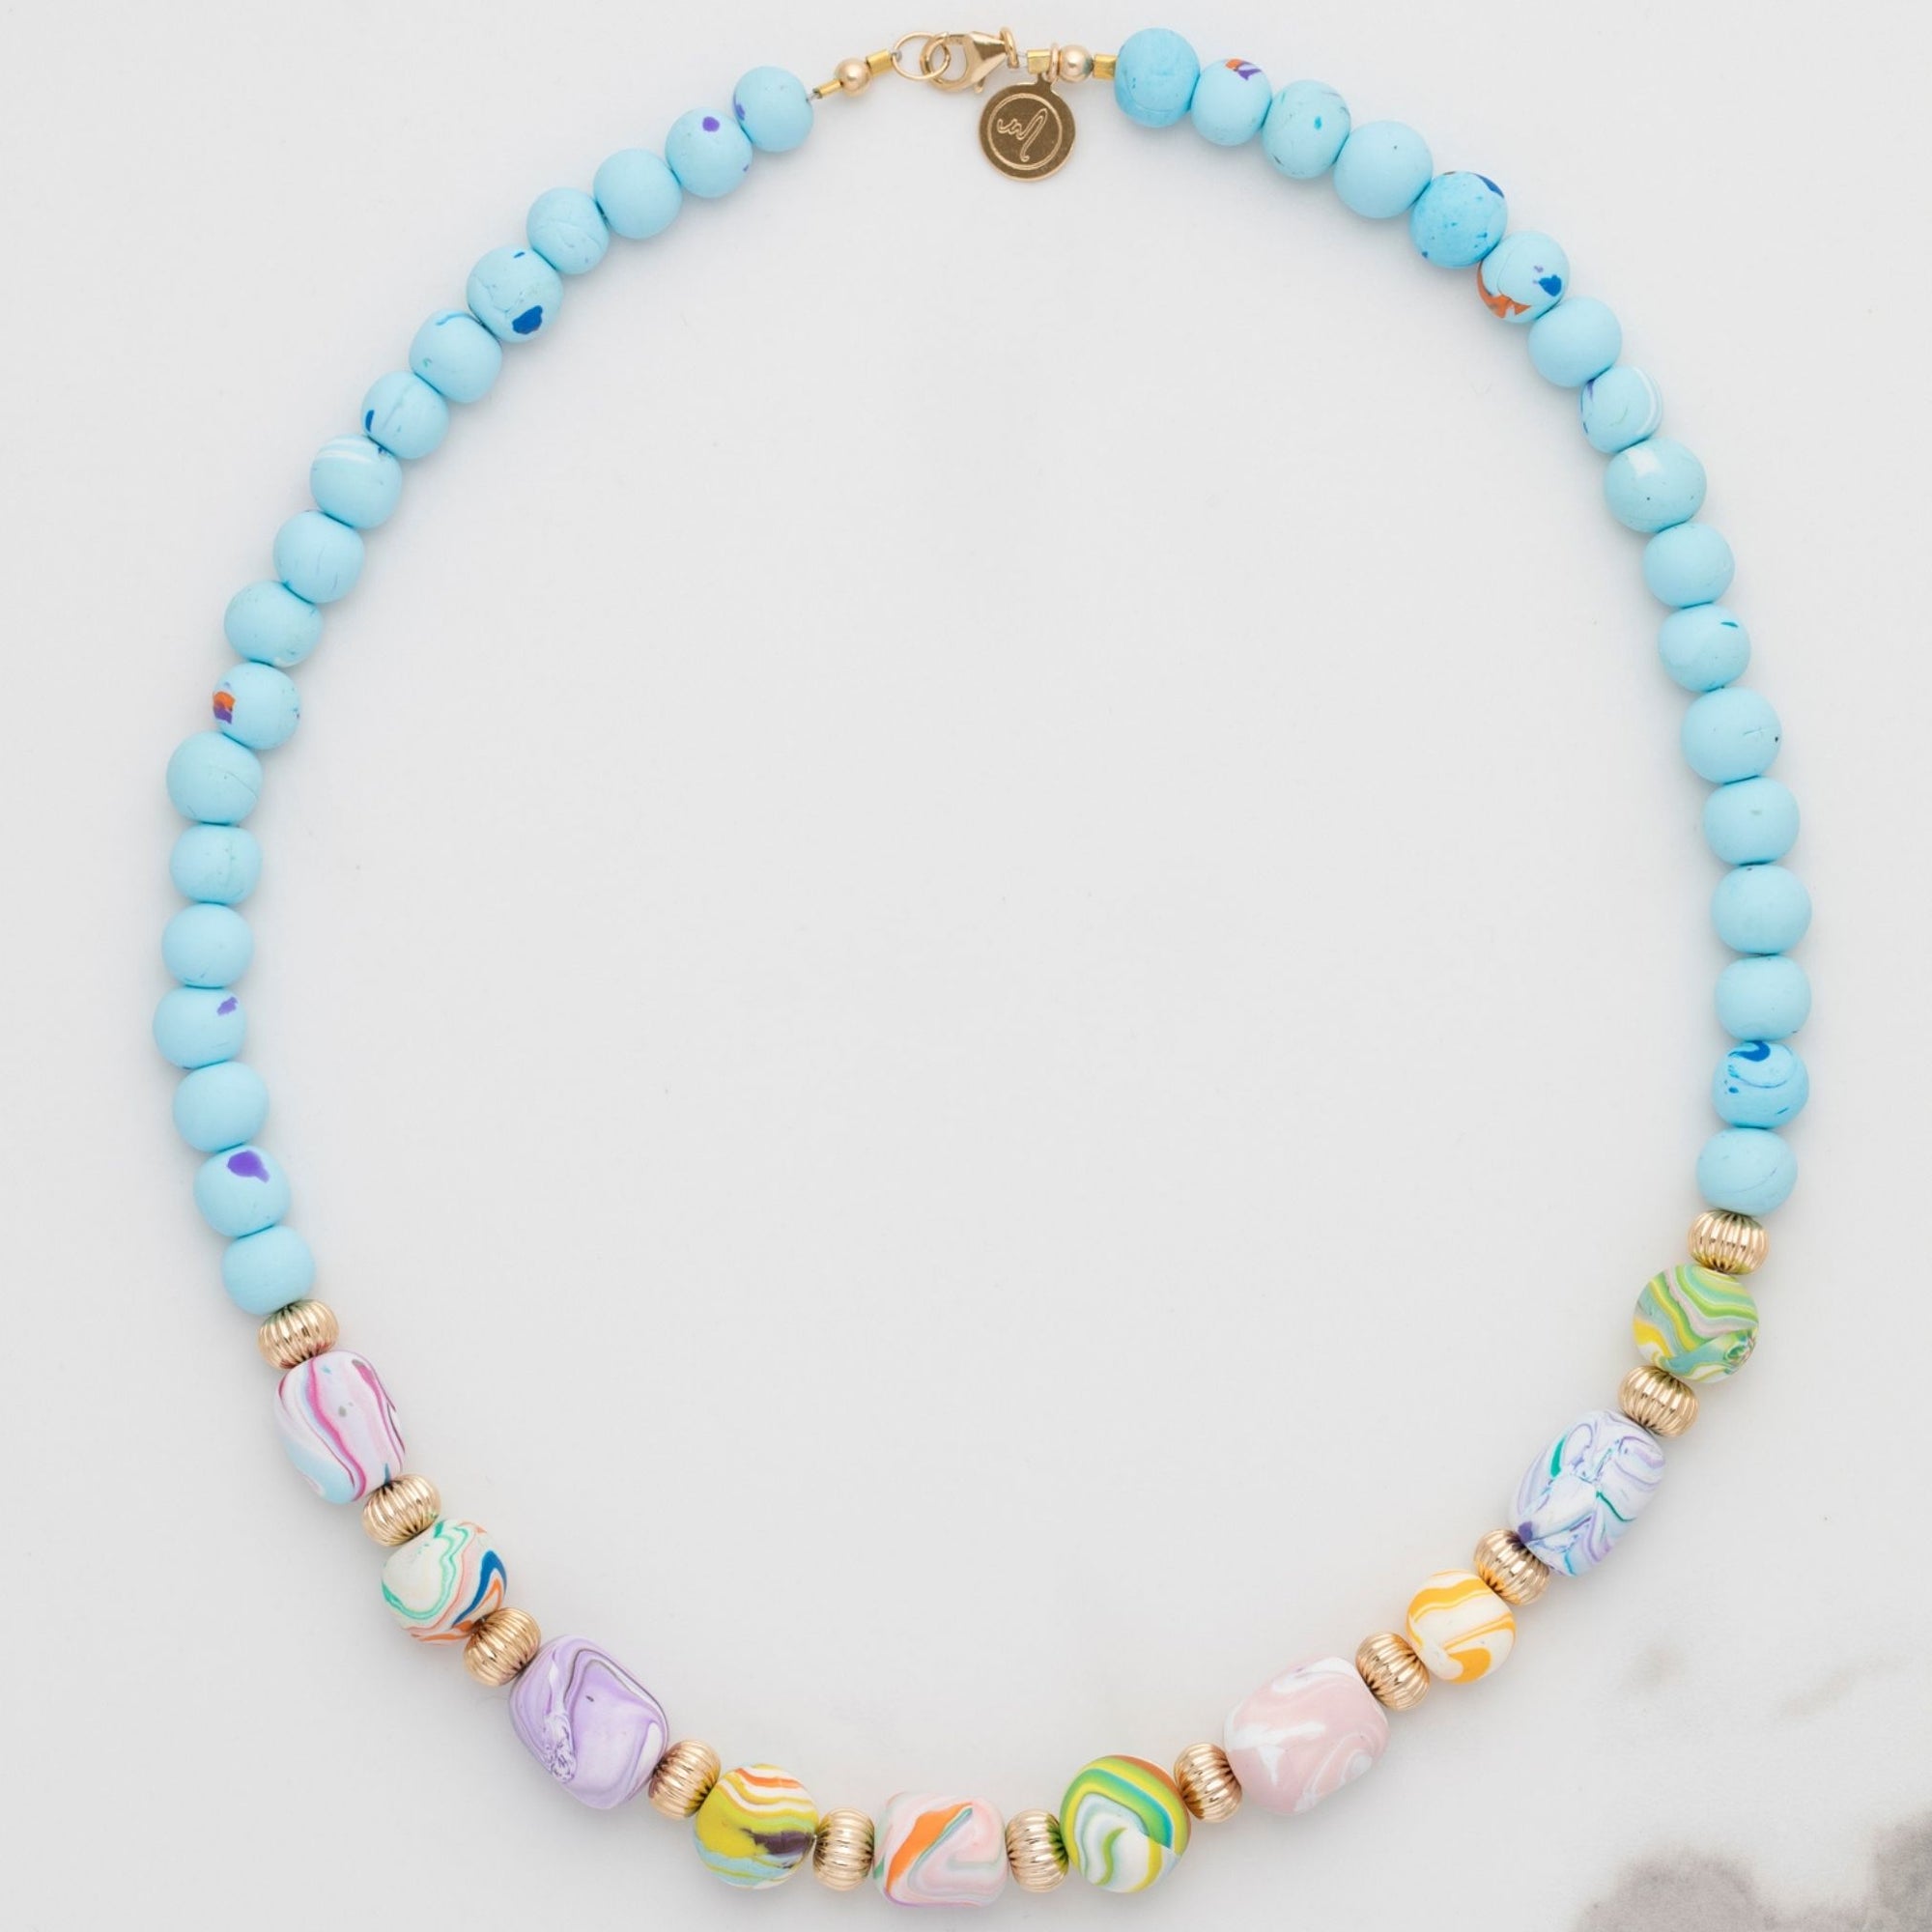 Marina-Ra Handmade Beads, quality gold filled findings and Marina-ra insignia. Beautiful Luxurious Packaging. Hand Assembled. Unique Gift. Stunning Necklace. multicoloured beads, white, blue beads. Trademark